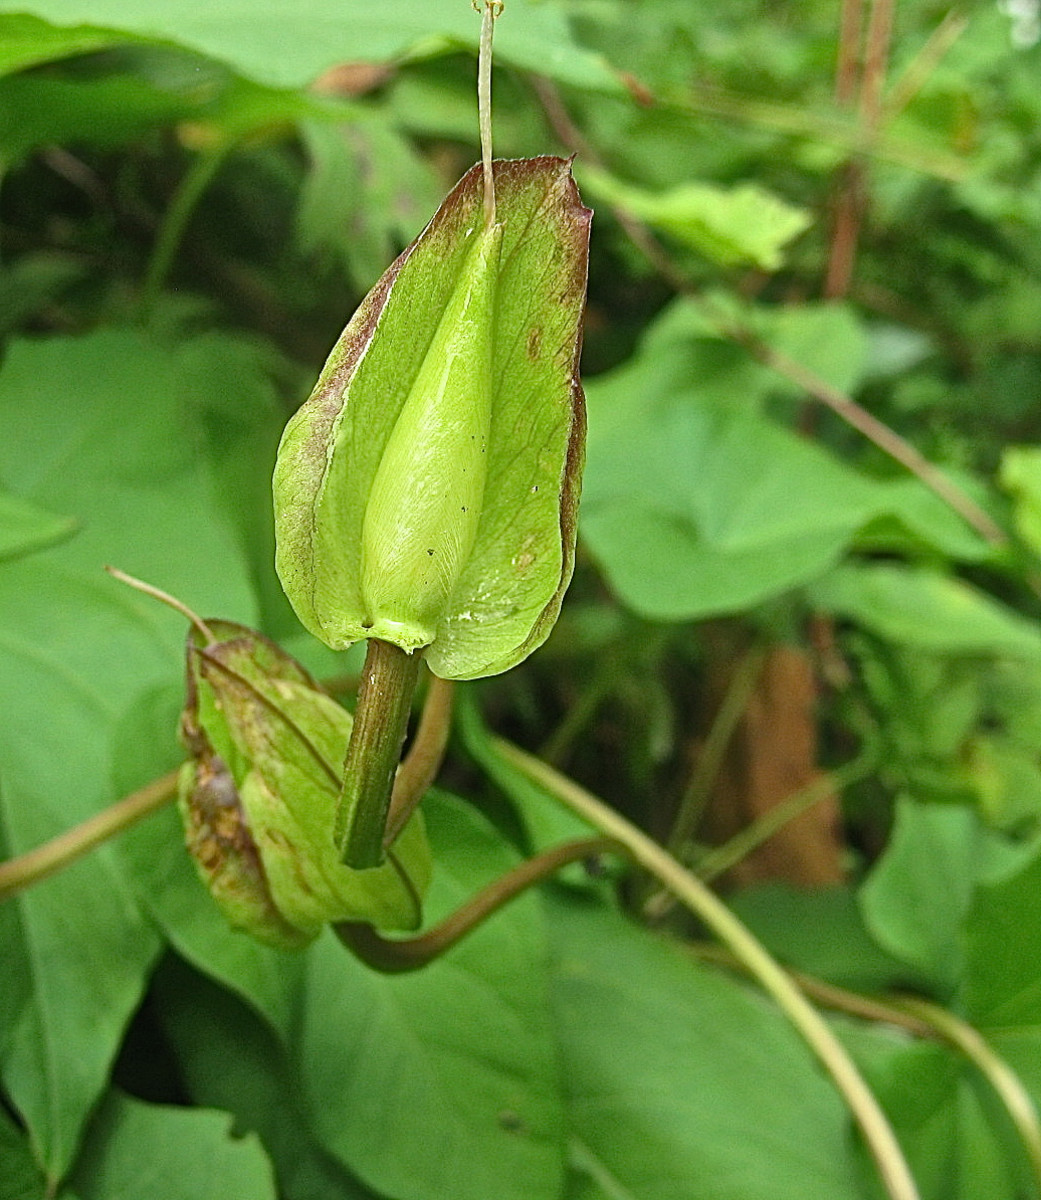 One of the two bracts that were at the base of the flower has been removed, showing the fruit inside.